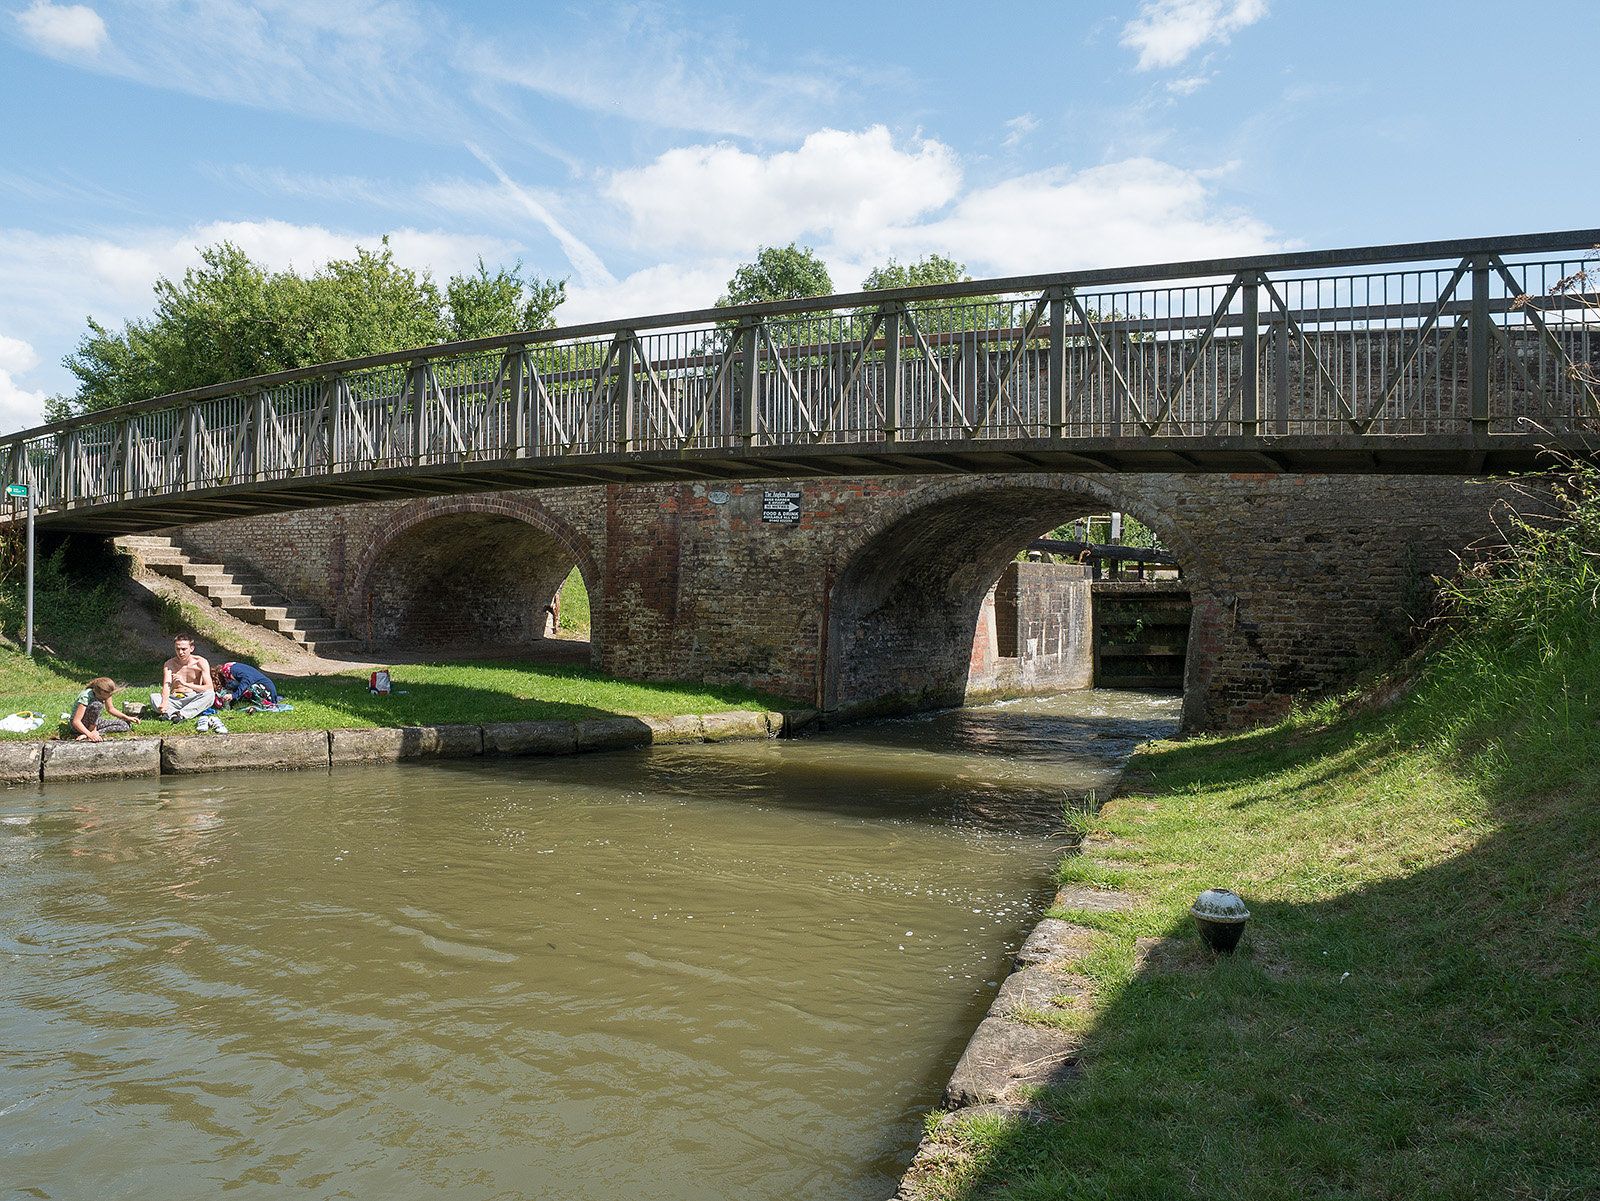 Looking back at bridge 132 (Lower Icknield bridge), clearly showing the unused archway.